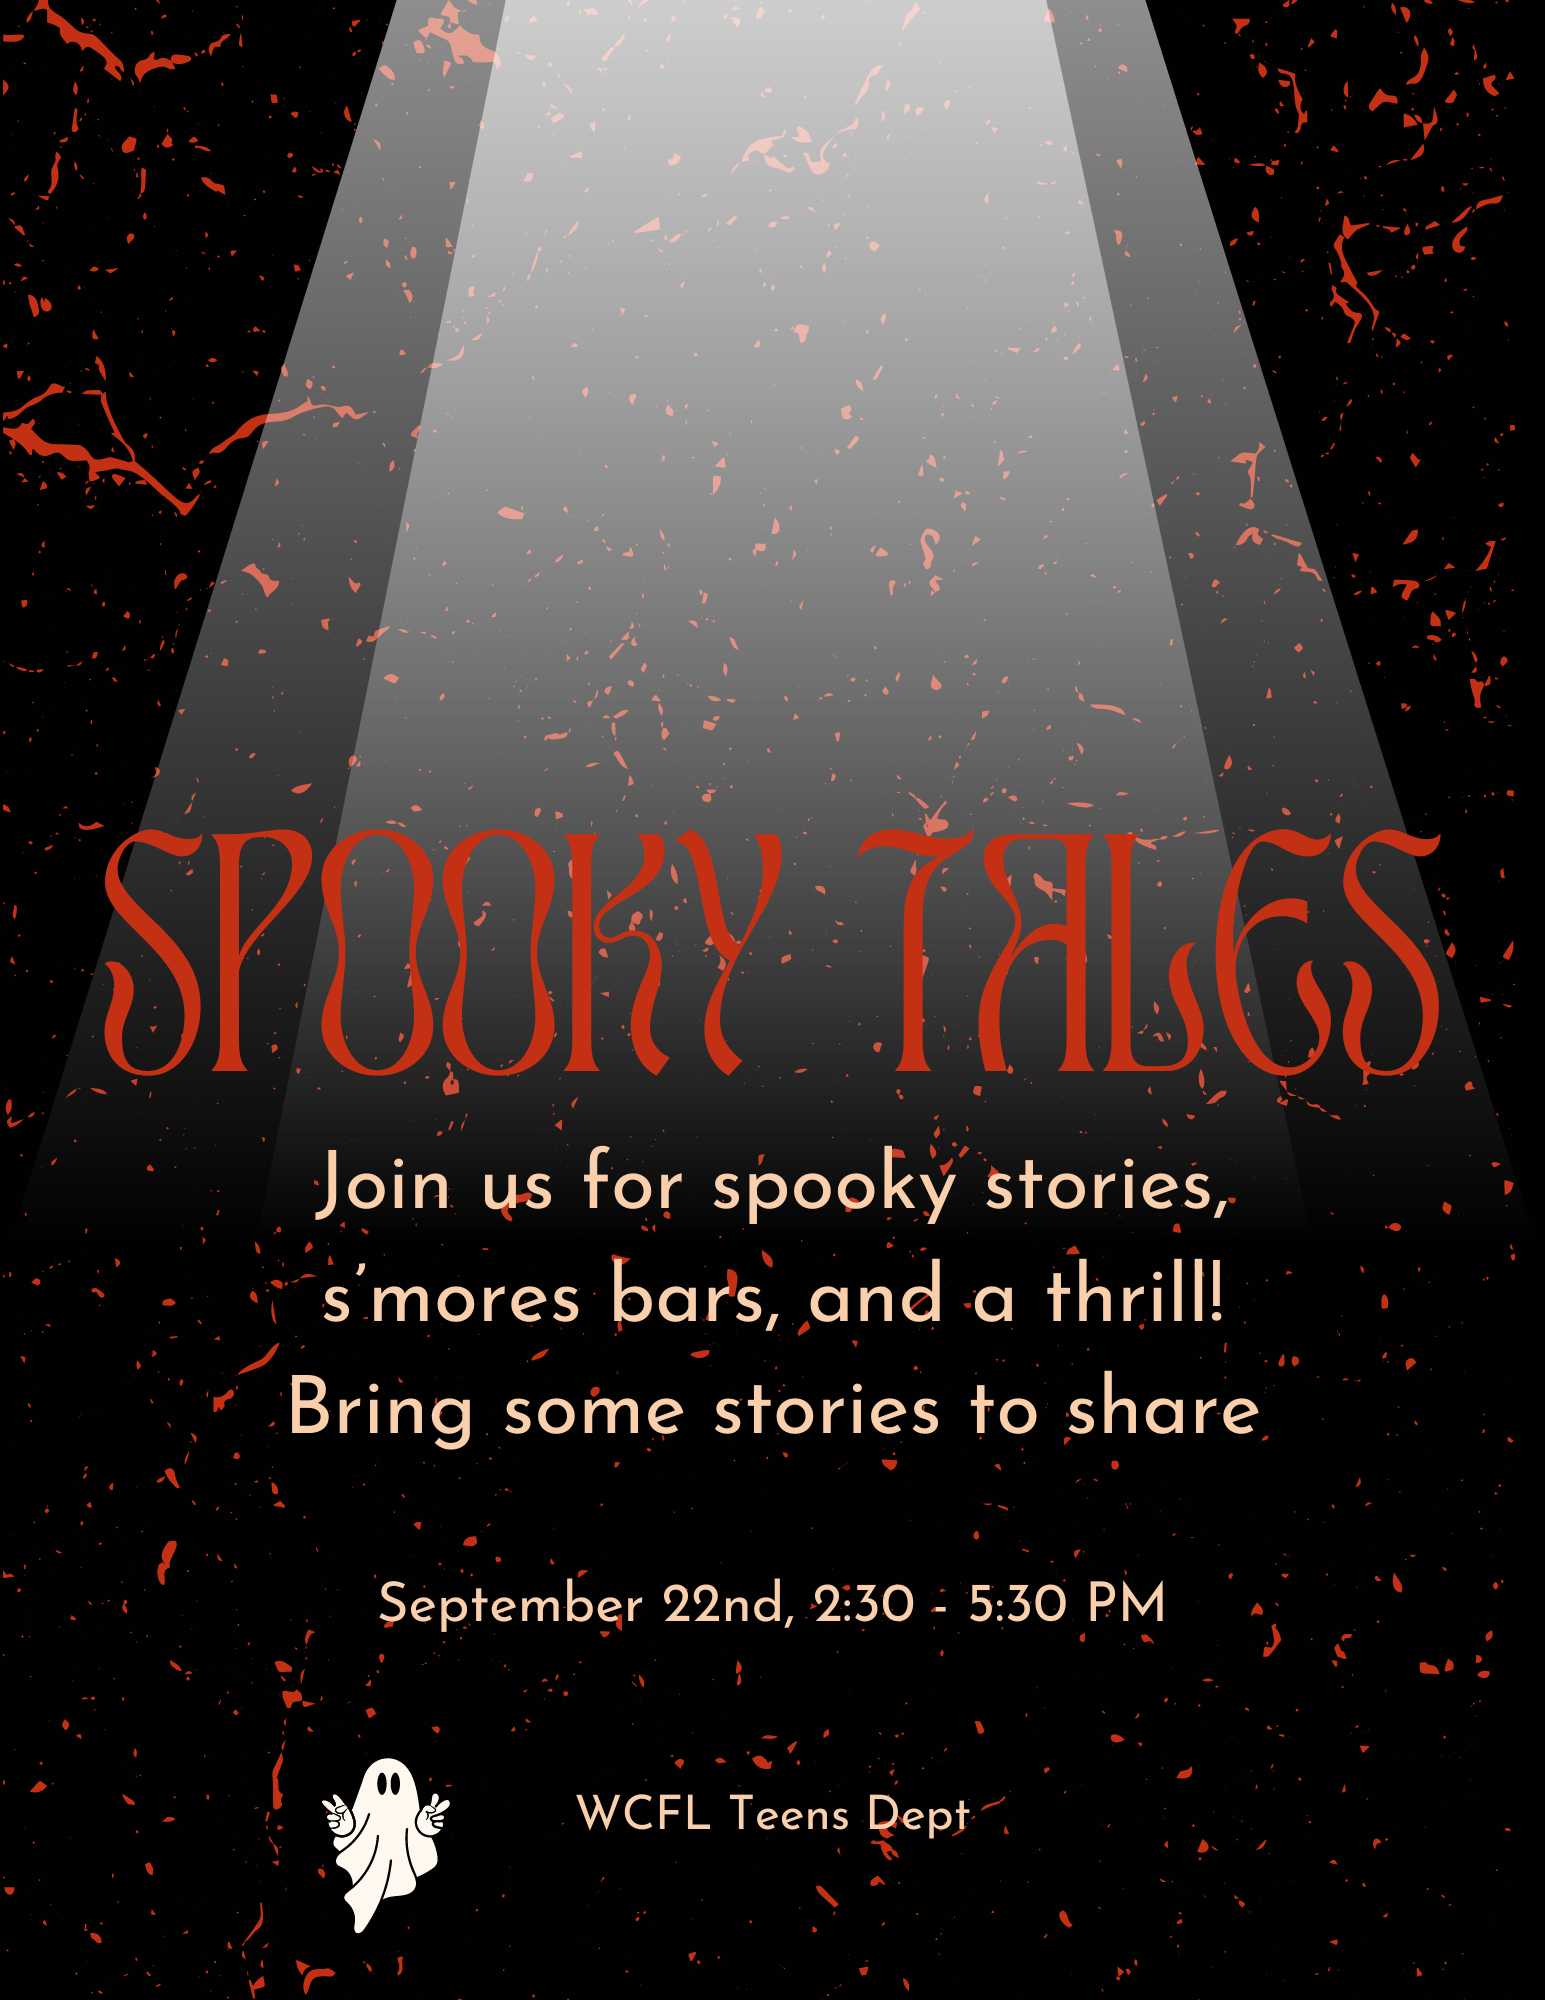 Spooky Tales highlighted by flashlight. Join us for spooky stories, s’mores bars, and a thrill! Bring some stories to share.